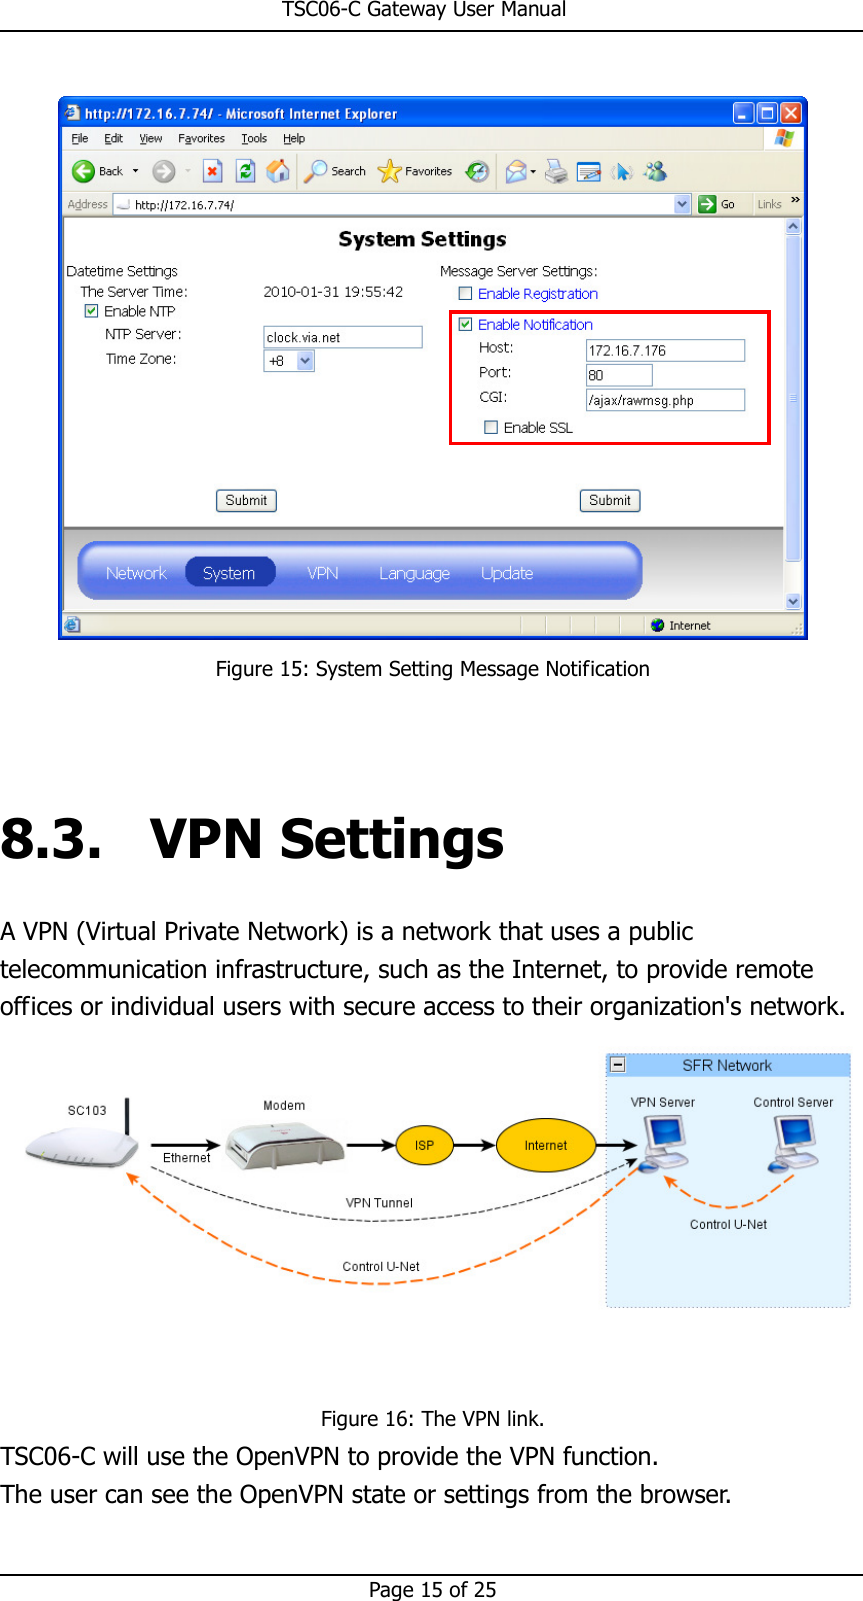                                                       TSC06-C Gateway User Manual   Page 15 of 25   Figure 15: System Setting Message Notification   8.3. VPN Settings A VPN (Virtual Private Network) is a network that uses a public telecommunication infrastructure, such as the Internet, to provide remote offices or individual users with secure access to their organization&apos;s network.    Figure 16: The VPN link. TSC06-C will use the OpenVPN to provide the VPN function. The user can see the OpenVPN state or settings from the browser. 